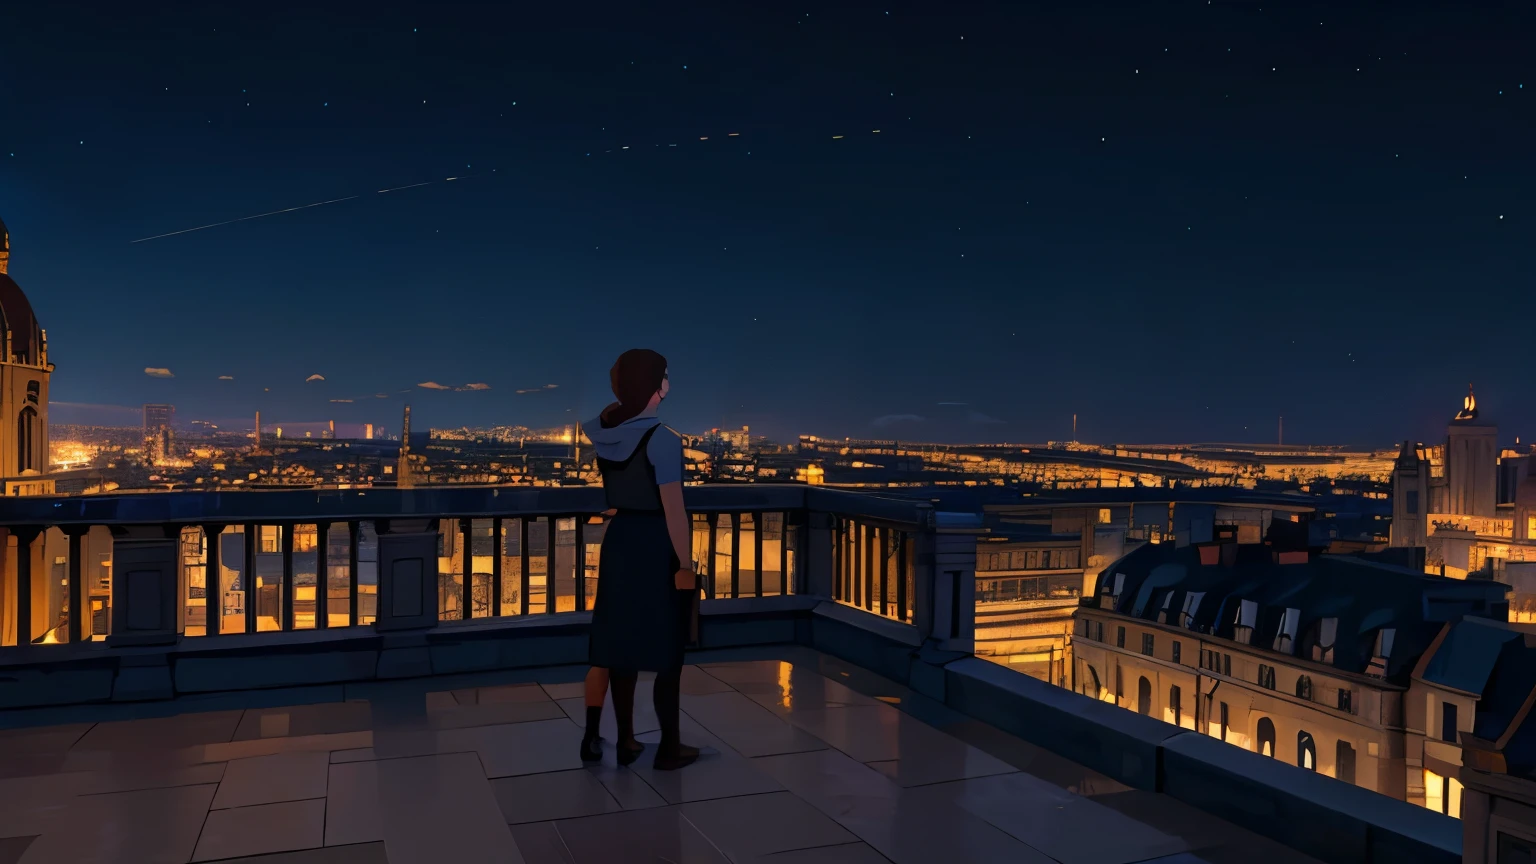 Terrace of a building + first person image + dark sky + city all lit up + high quality image + 4K